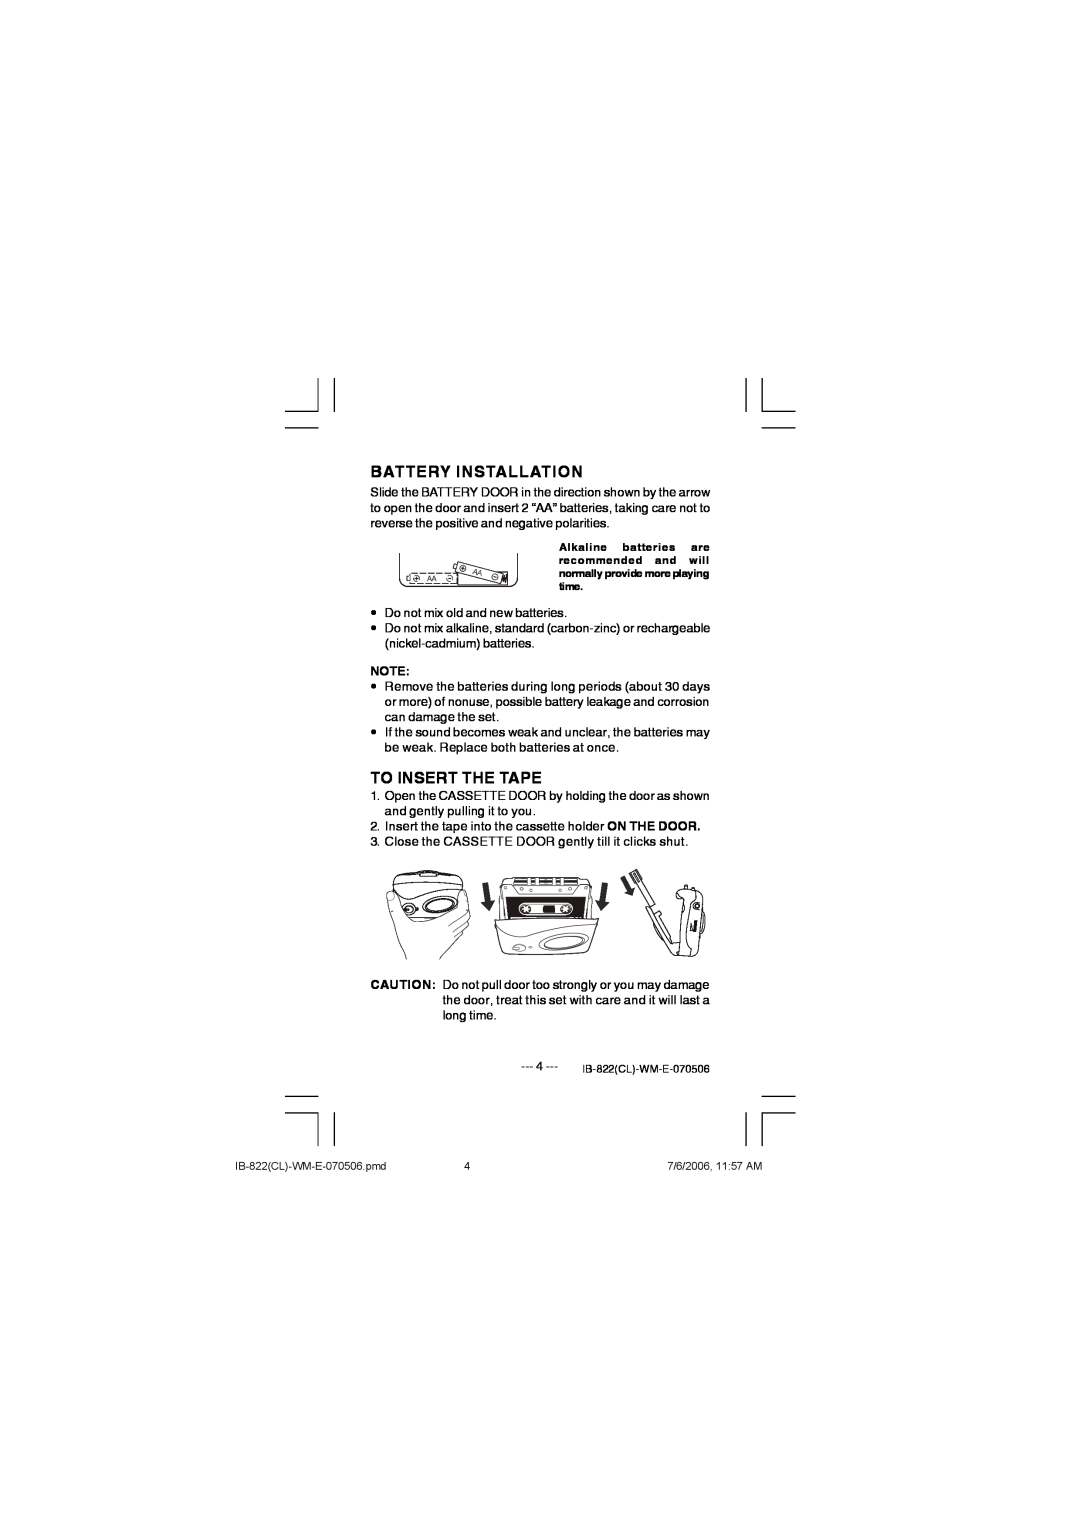 Lenoxx Electronics 822 manual Battery Installation, To Insert The Tape 